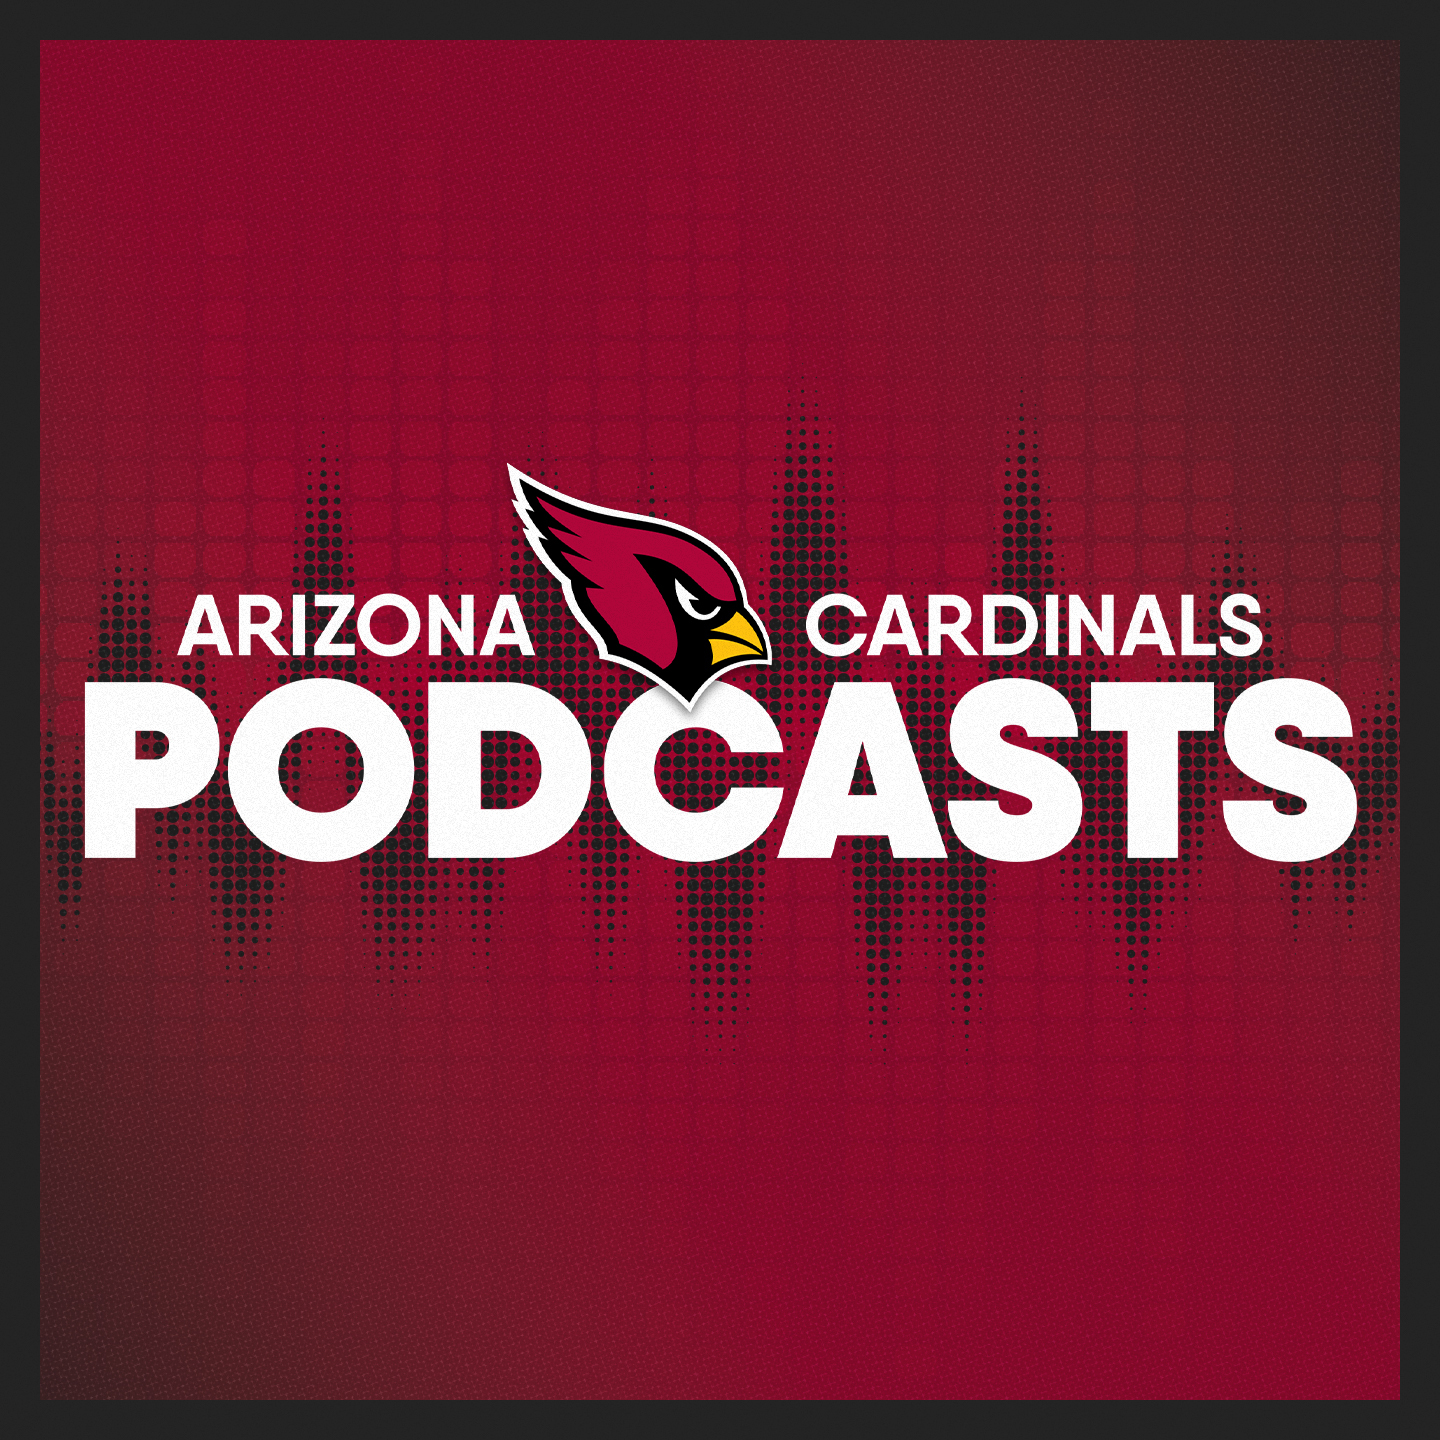 Cardinals Cover 2 - Welcome back, Birdgang!